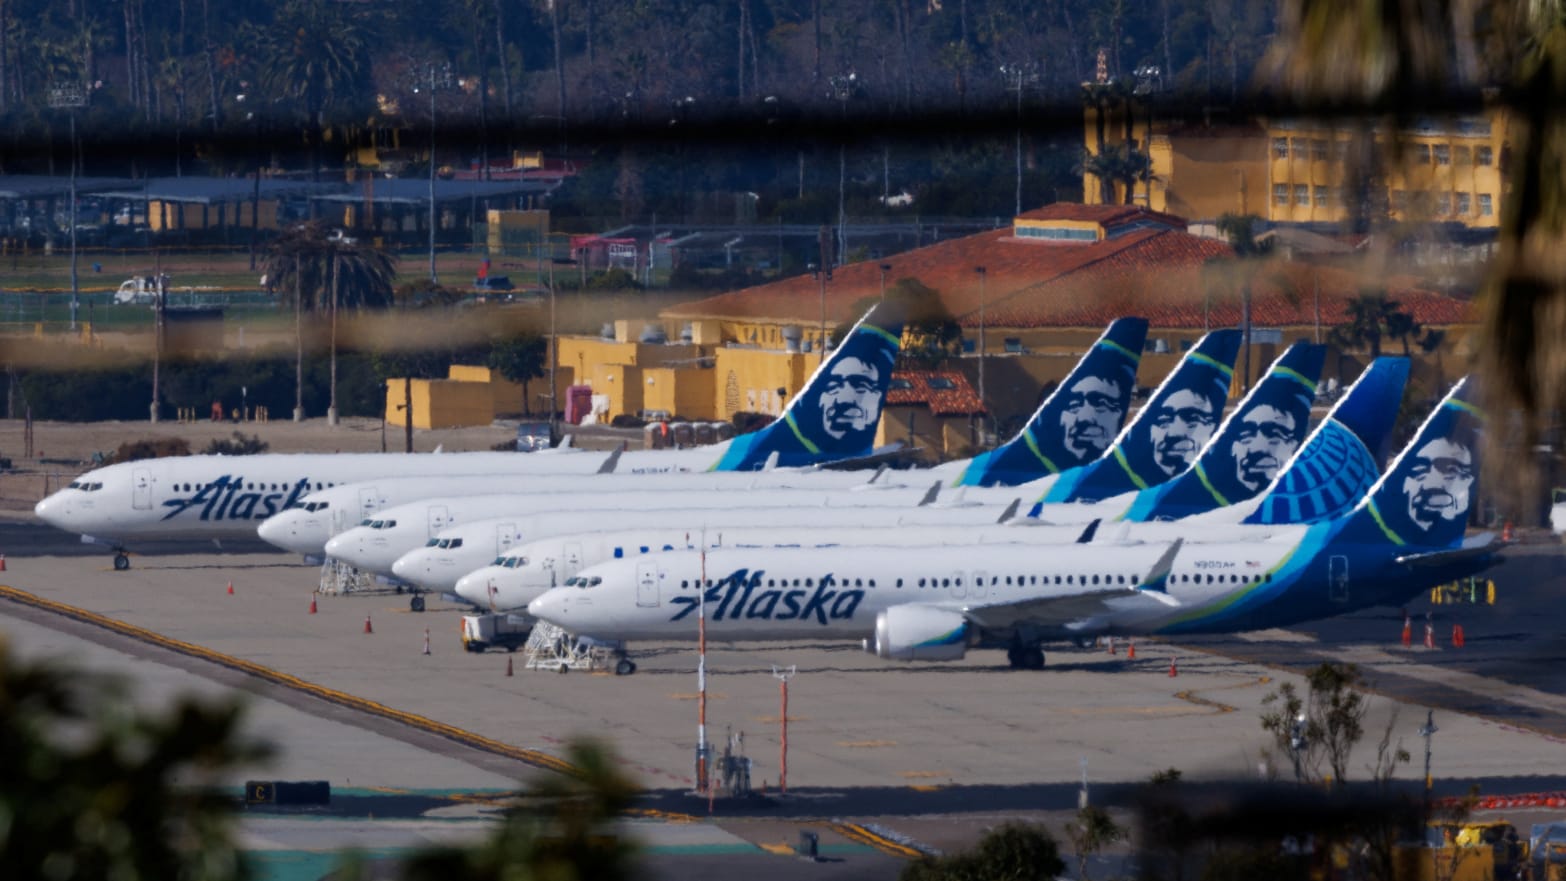 Alaska Airlines commercial airplanes parked off to the side of the airport in San Diego, California.